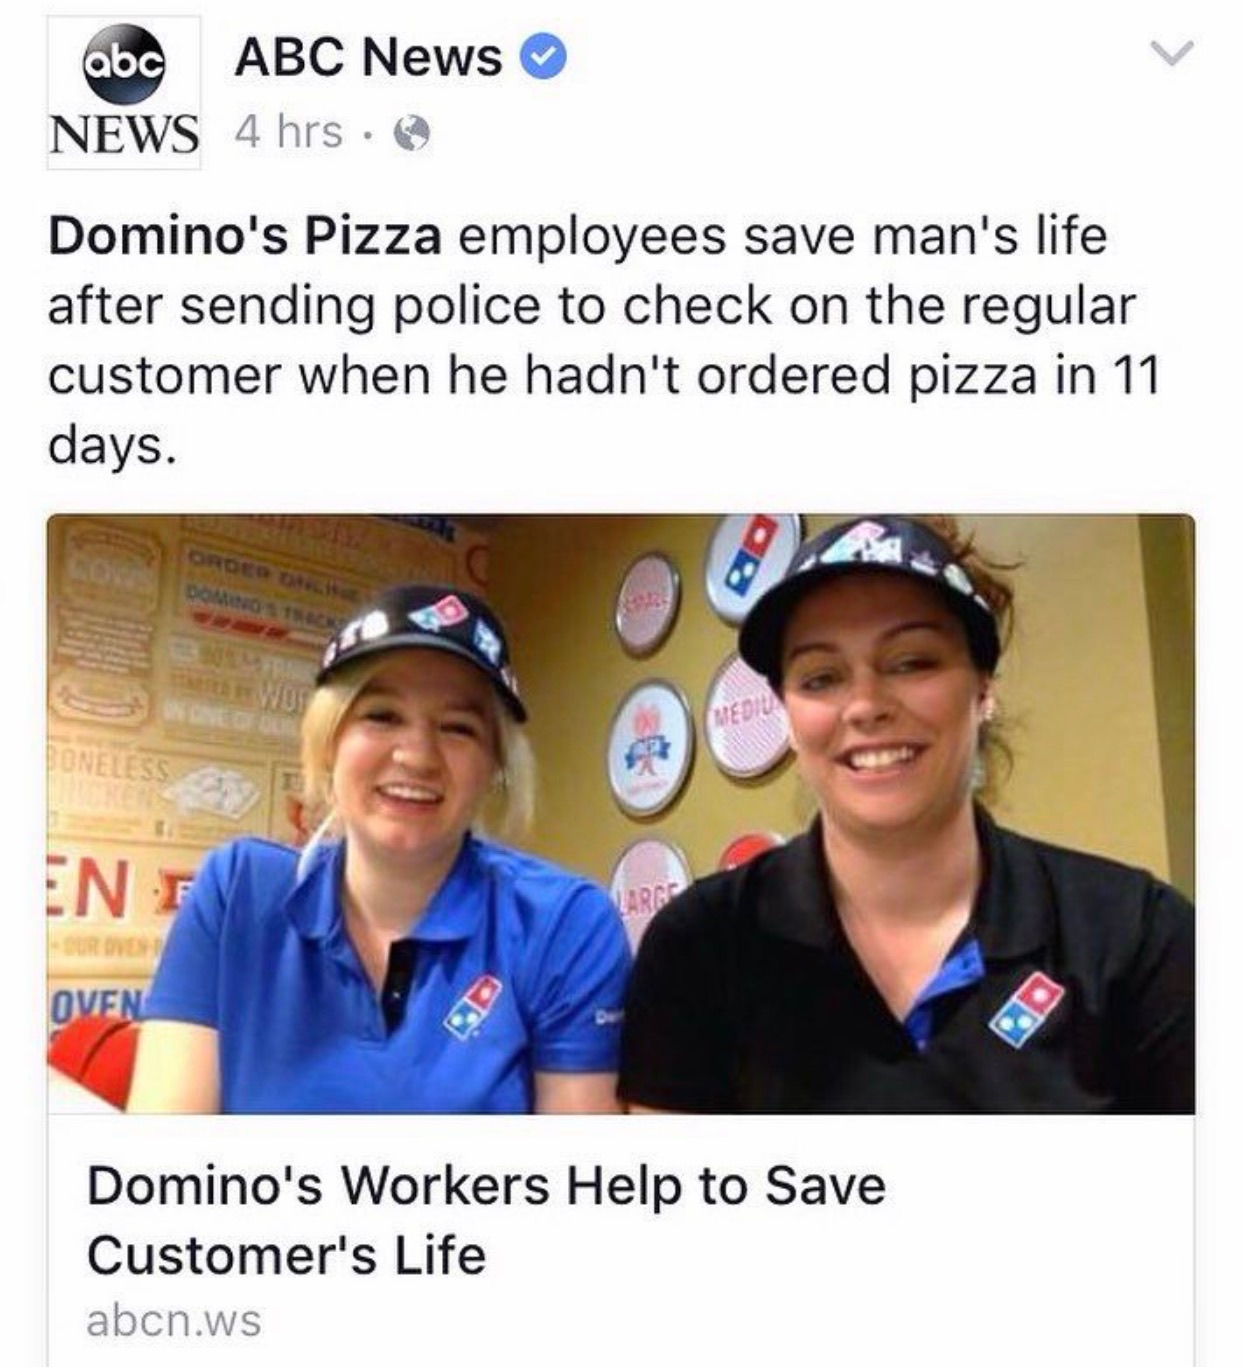 memes - domino's workers - abc Abc News News 4 hrs. Domino's Pizza employees save man's life after sending police to check on the regular customer when he hadn't ordered pizza in 11 days. En Oven Domino's Workers Help to Save Customer's Life abcn.ws